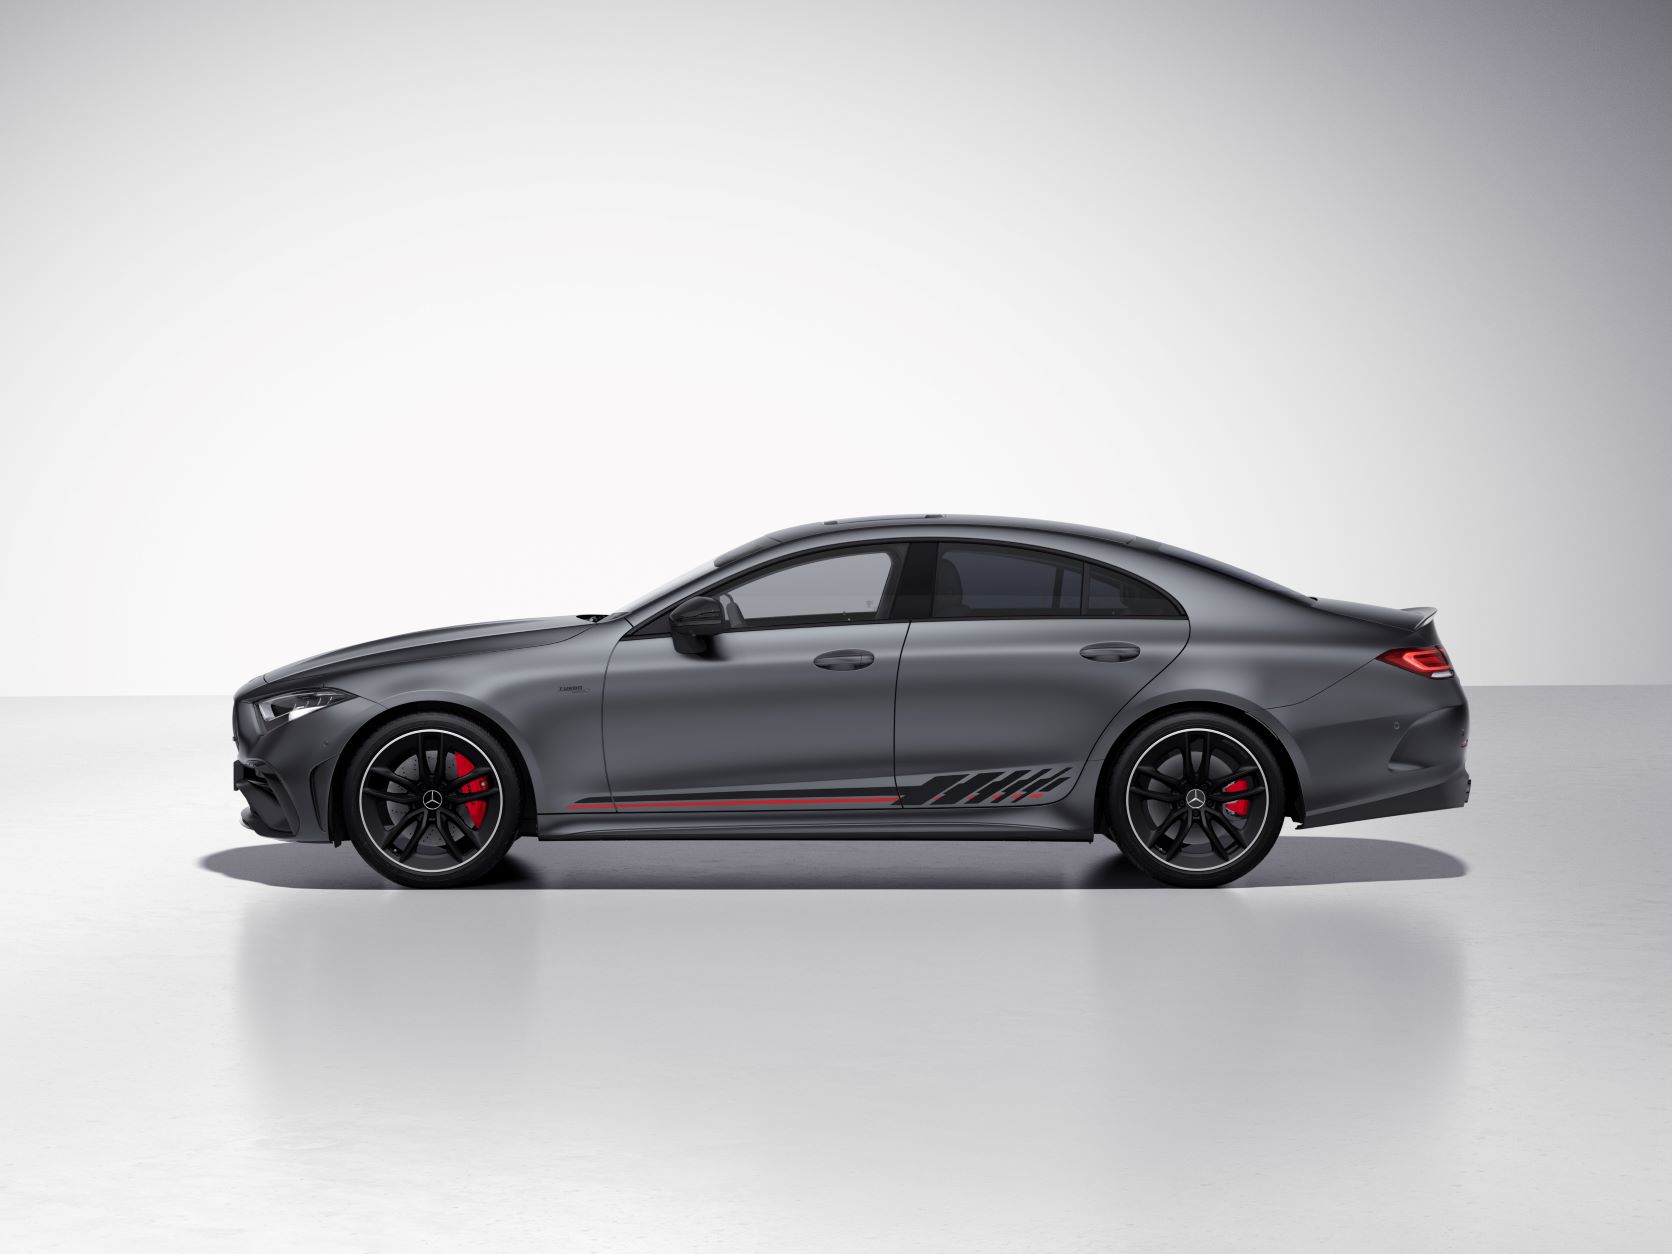 Limited Edition version of the Mercedes-AMG CLS53 4MATIC+